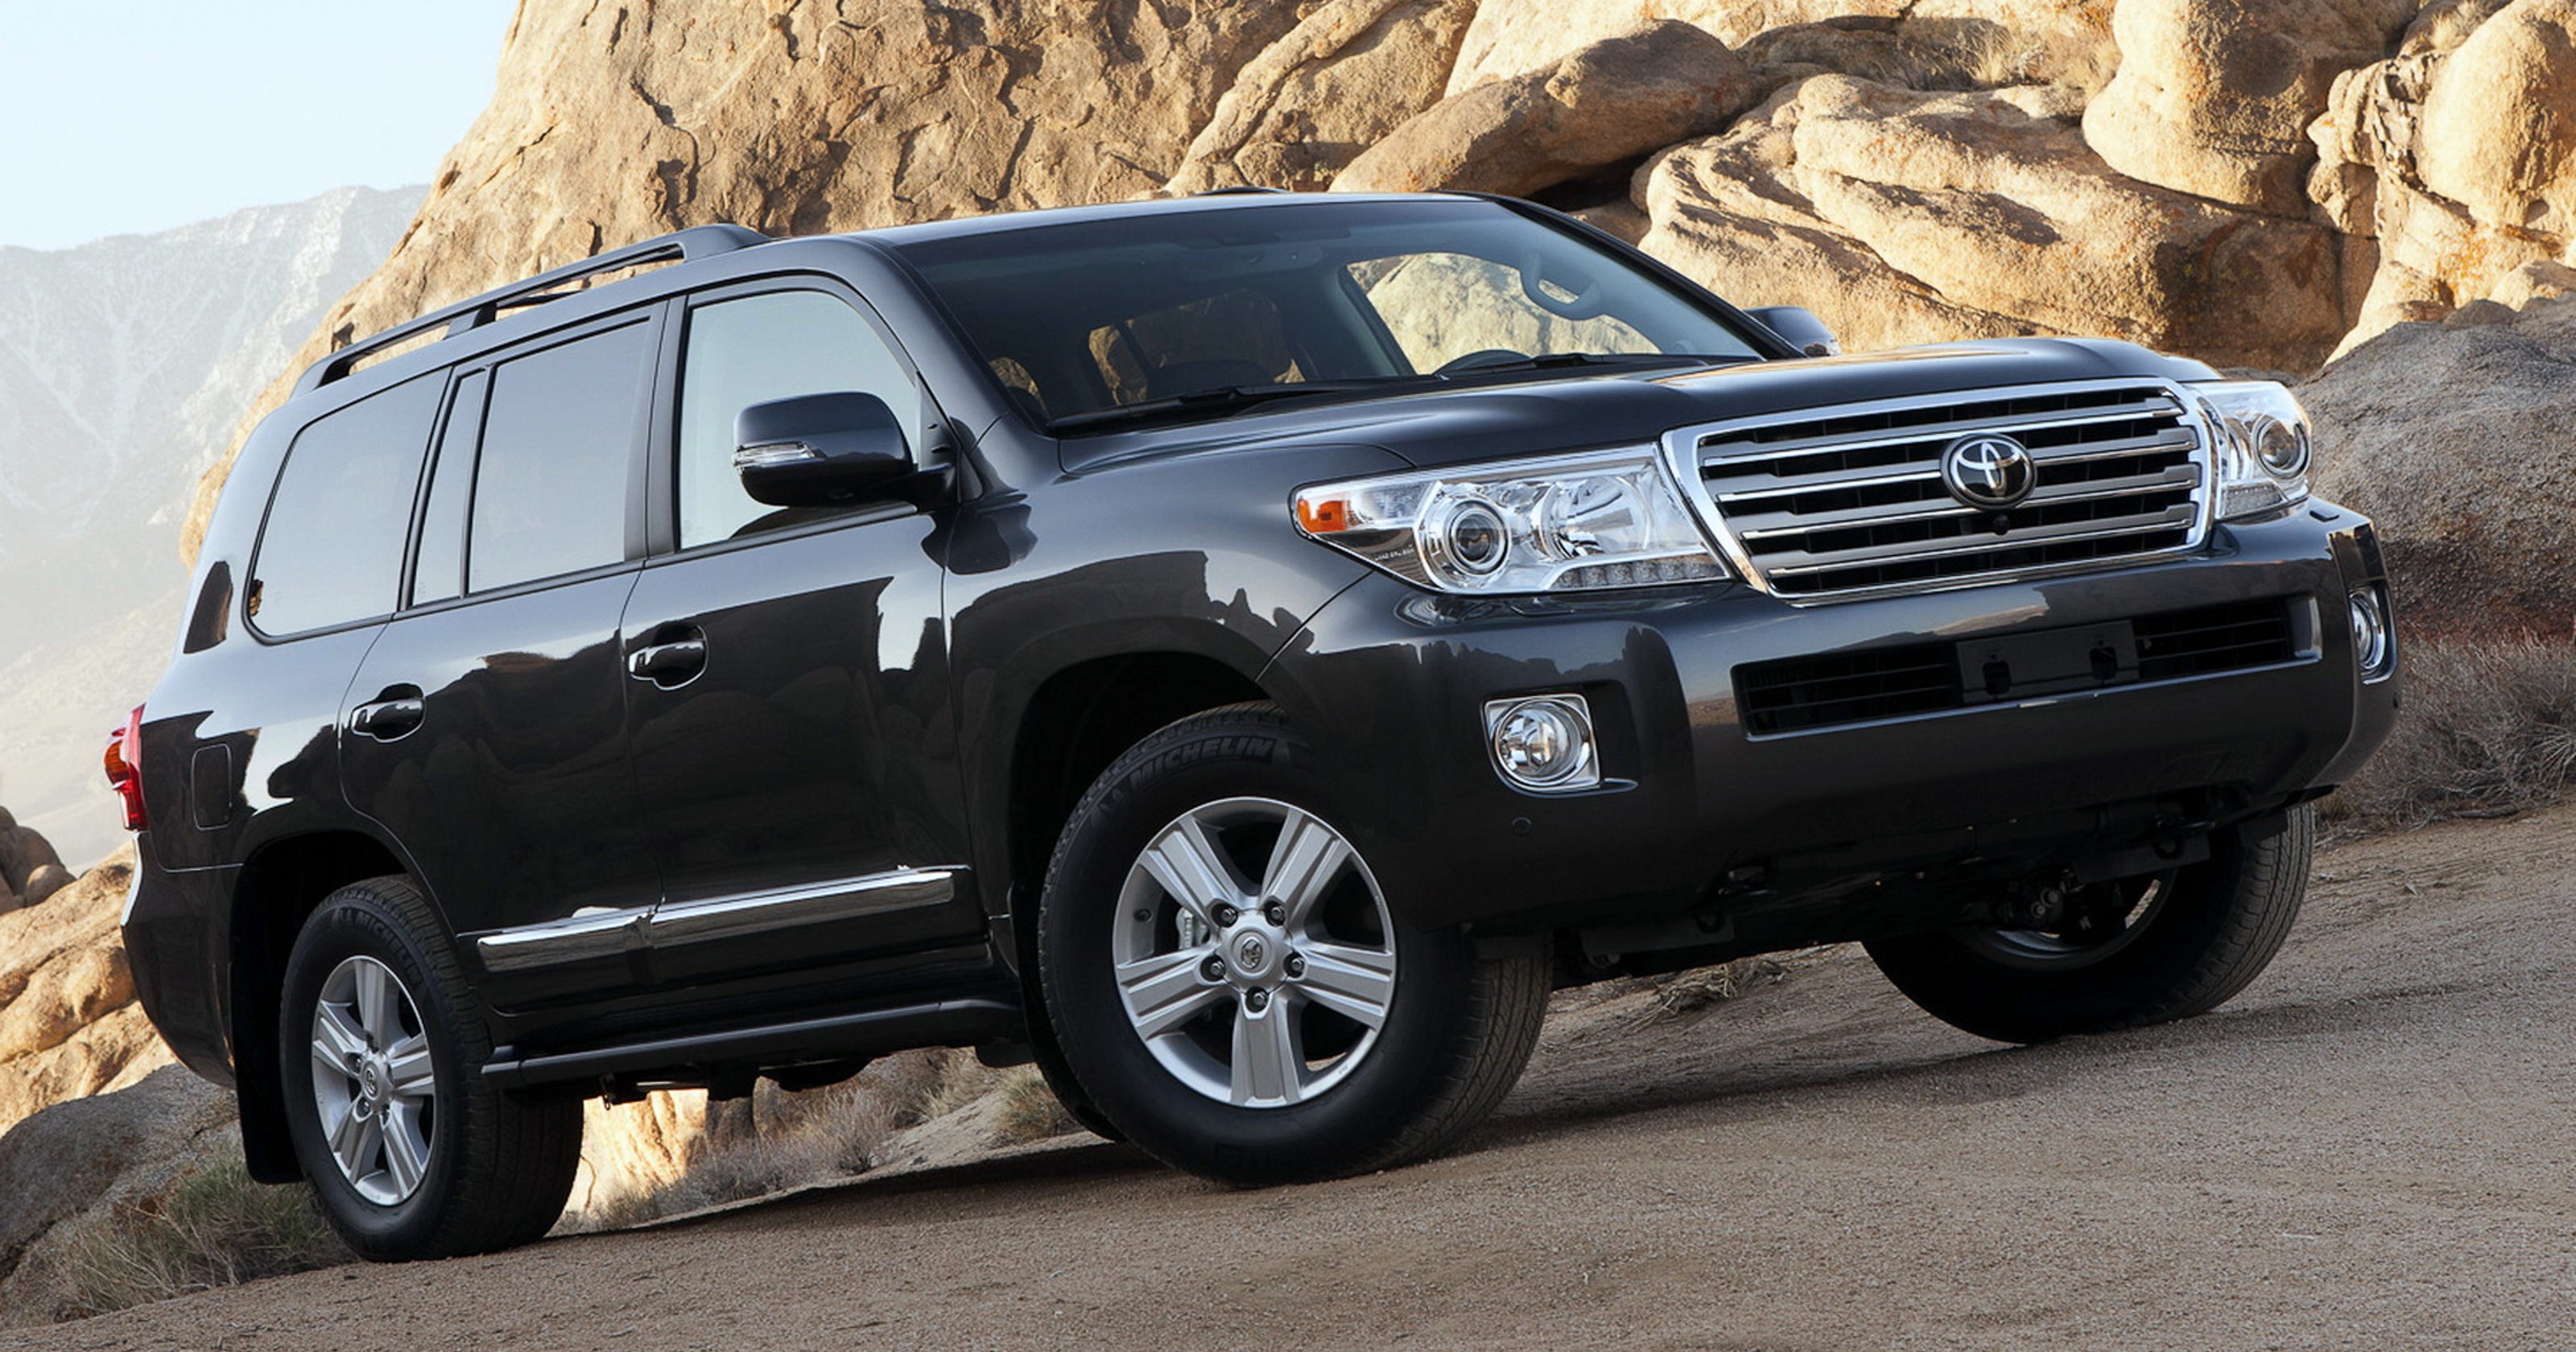 2014 Toyota Land Cruiser not just an offroad vehicle